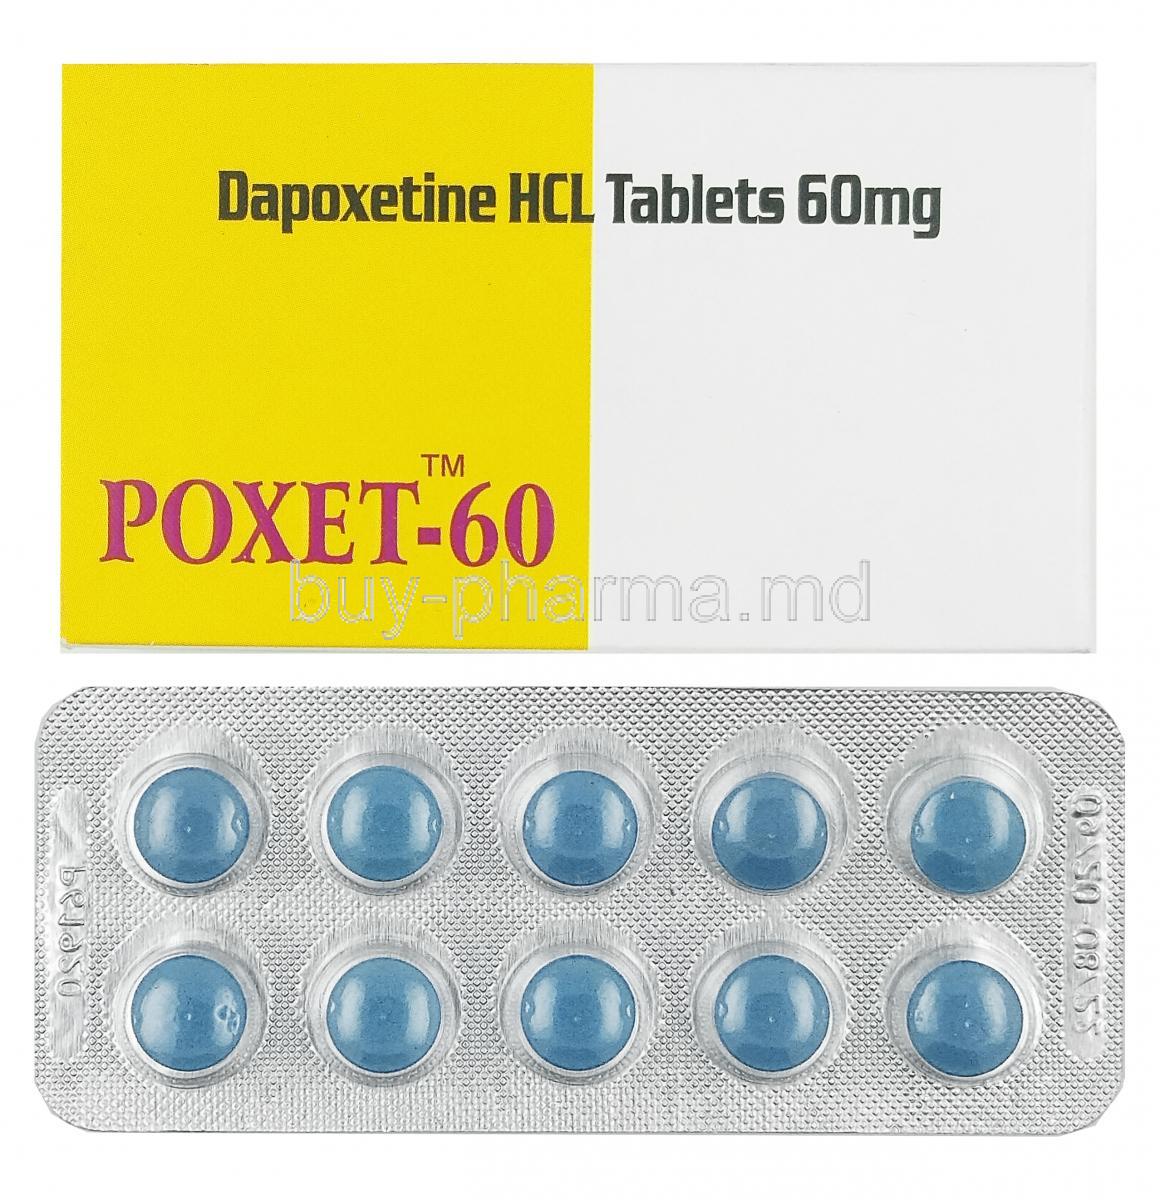 Poxet, Dapoxetine 60mg box and tablets